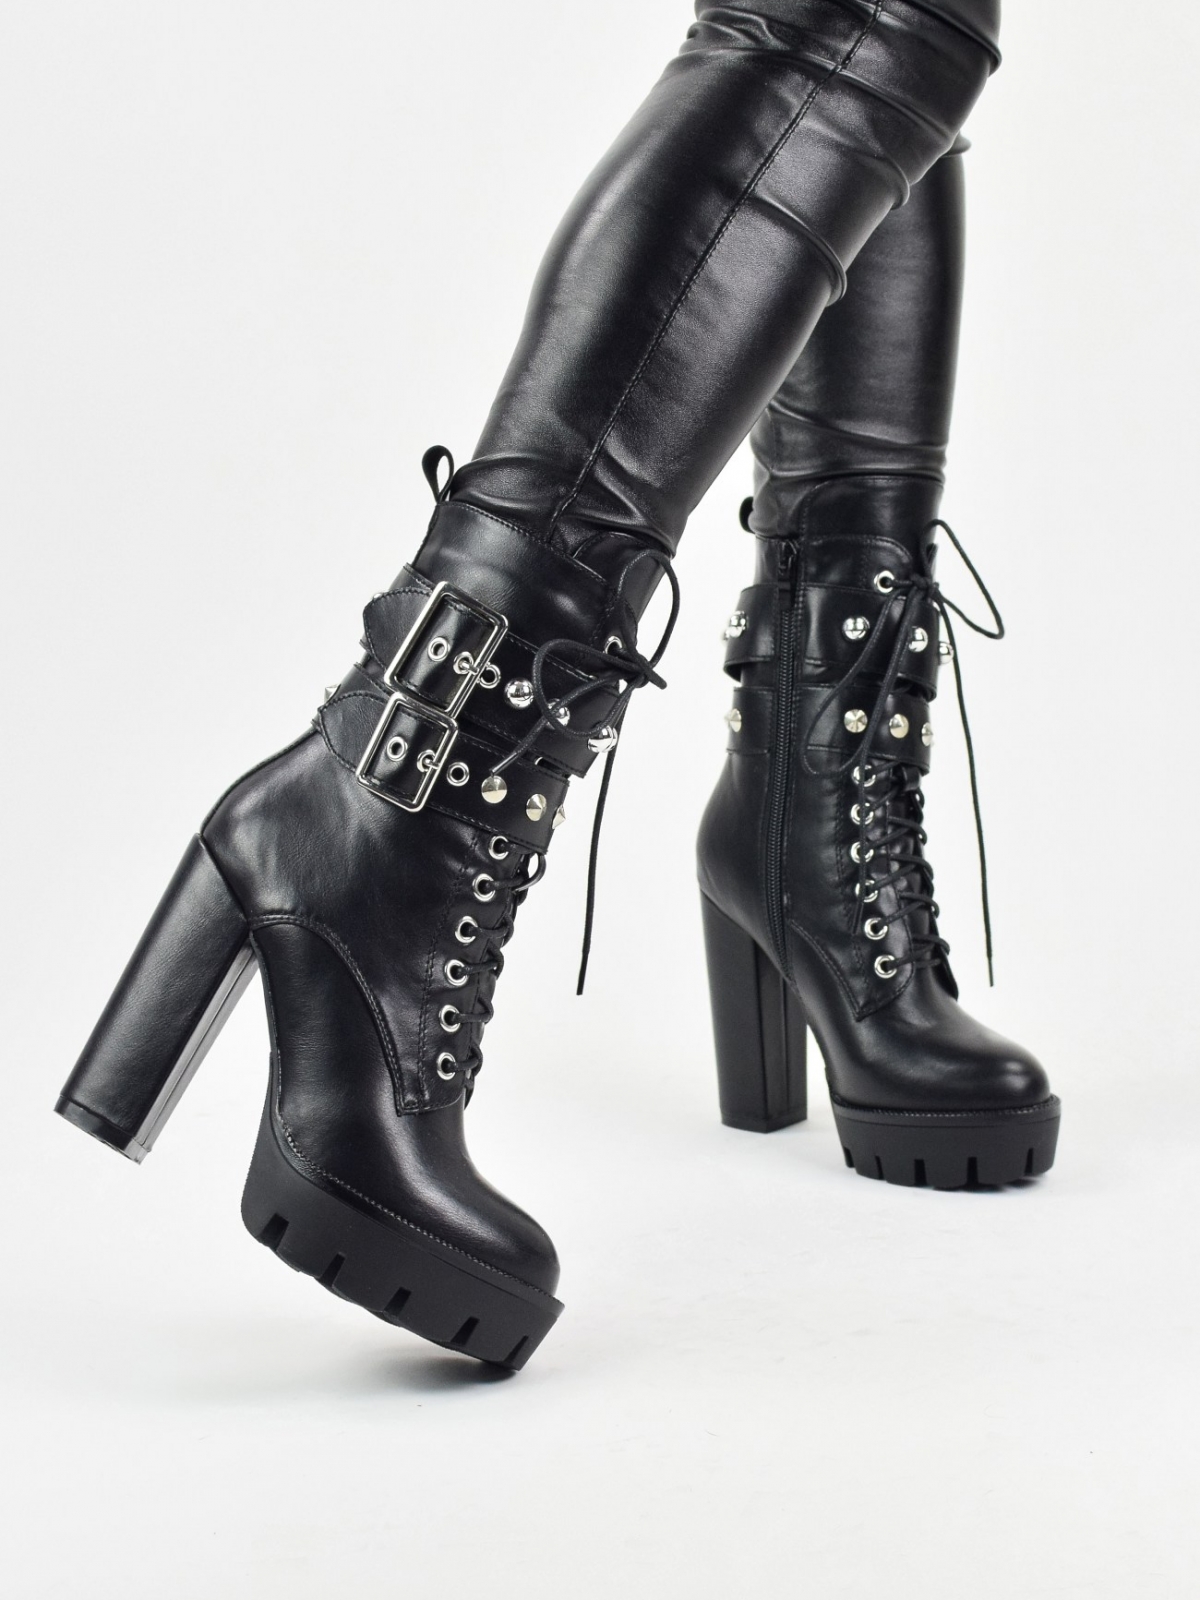 High block heeled lace up platform boots with side zip & front metal details in black